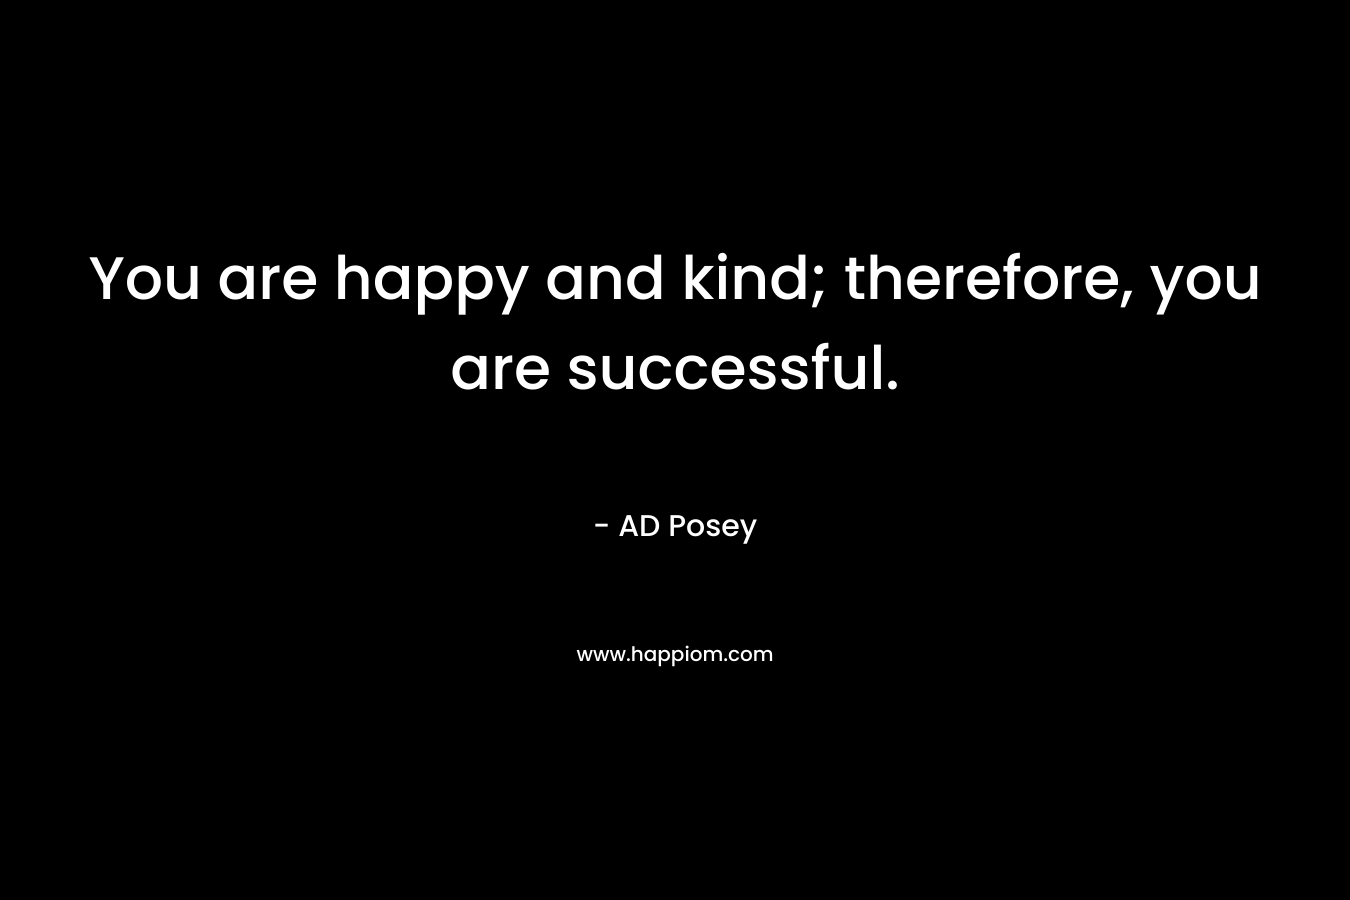 You are happy and kind; therefore, you are successful.